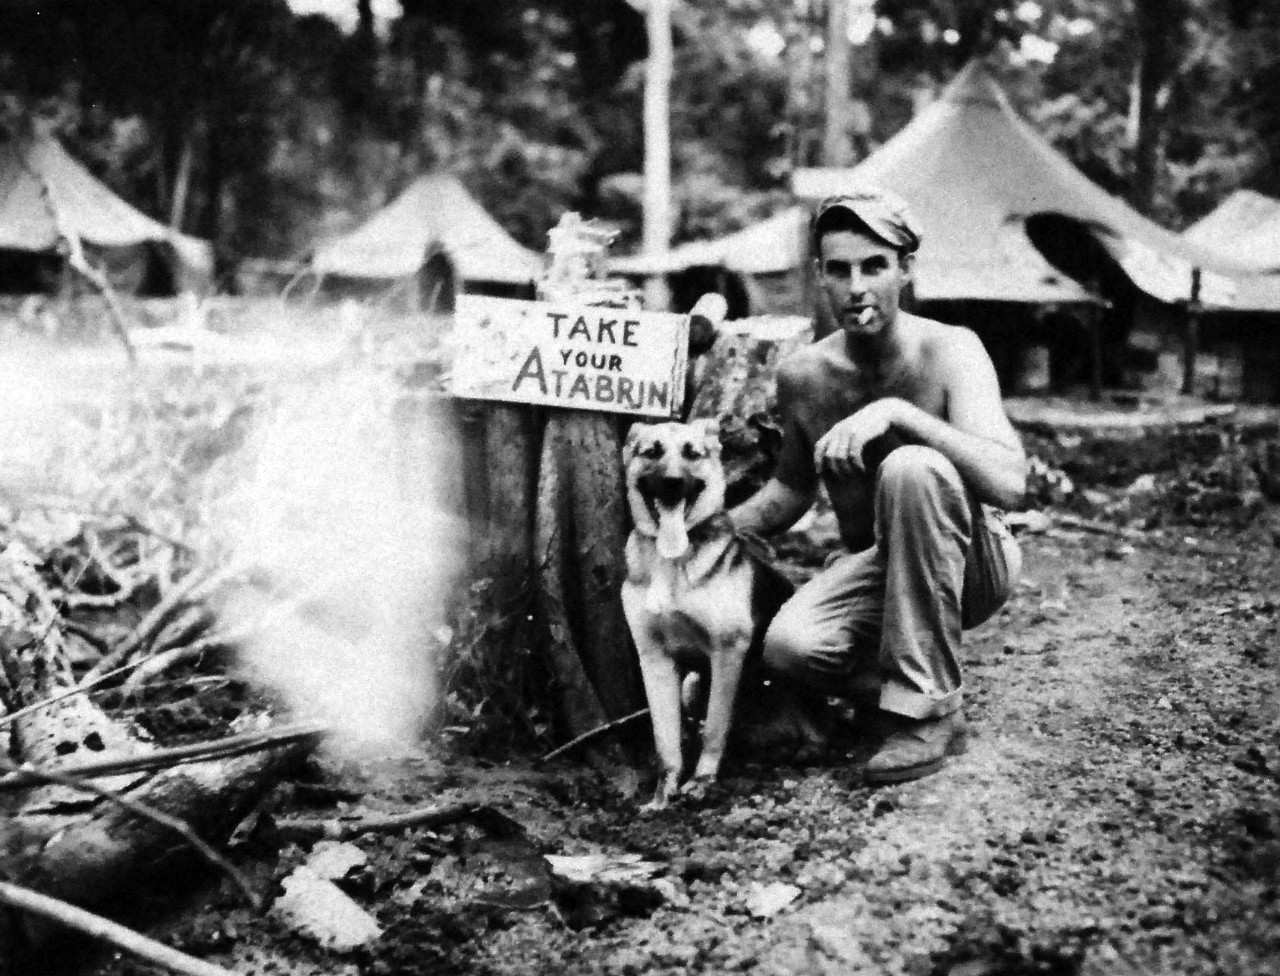 127-GW-966-77356:  Battle of Cape Gloucester, New Britain, December 1943-January 1944.   “Japanese sentry who joined Marines.”   “Nipper,” a Japanese sentry dog, who voluntarily joined the Marines on Cape Glouchester, poses with Marine Master Technical Sergeant George E. Ausman, who had been a Marine since 1926.   Photographed by Sergeant G.F. Koepplinger, 10 February 1944.   Official U.S. Marine Corps Photograph, now in the collections of the National Archives.   (2014/7/9).